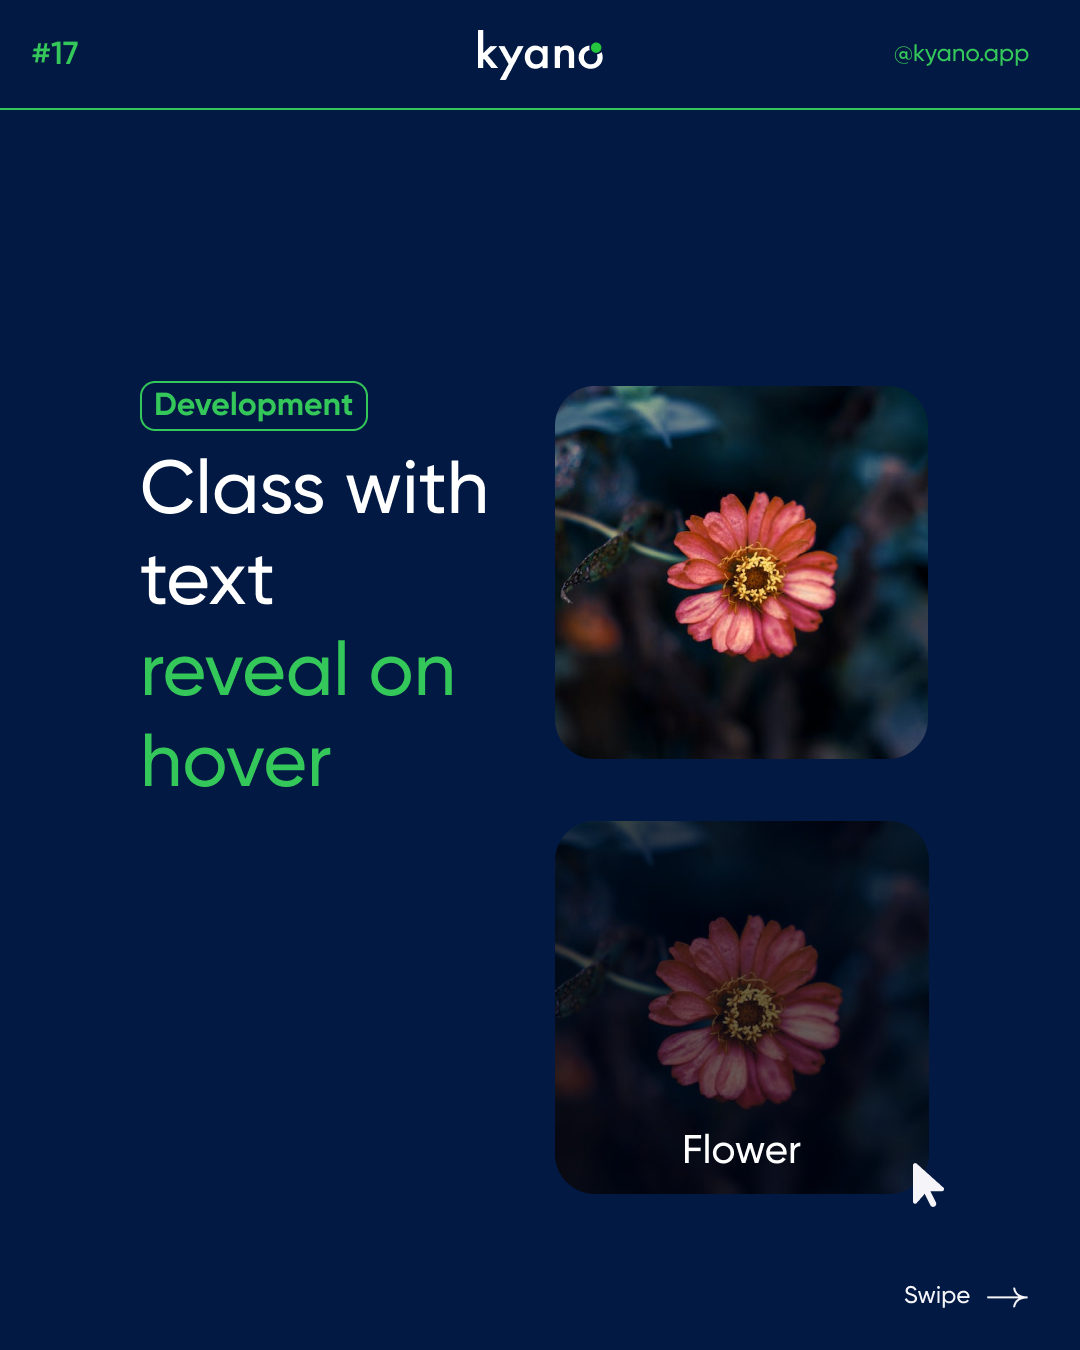 Text reveal on hover